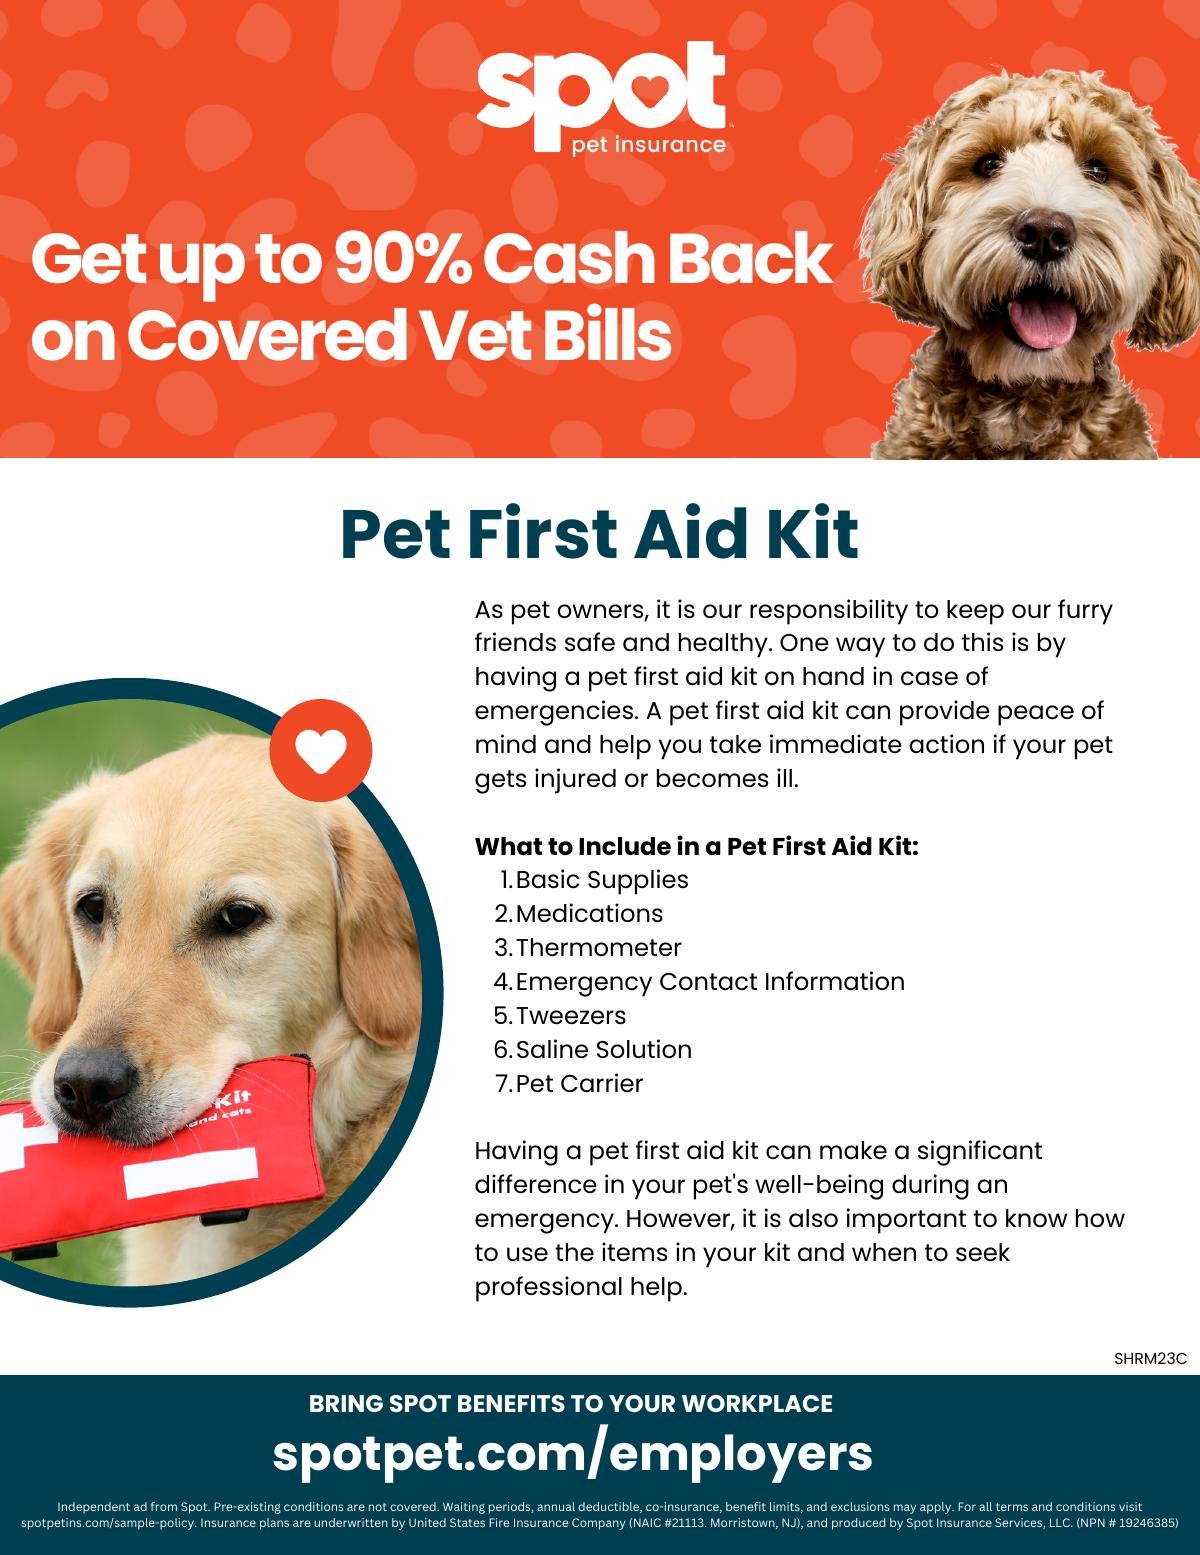 Keep Your Employees' Pets Healthy with Spot's Pet First Aid Kit